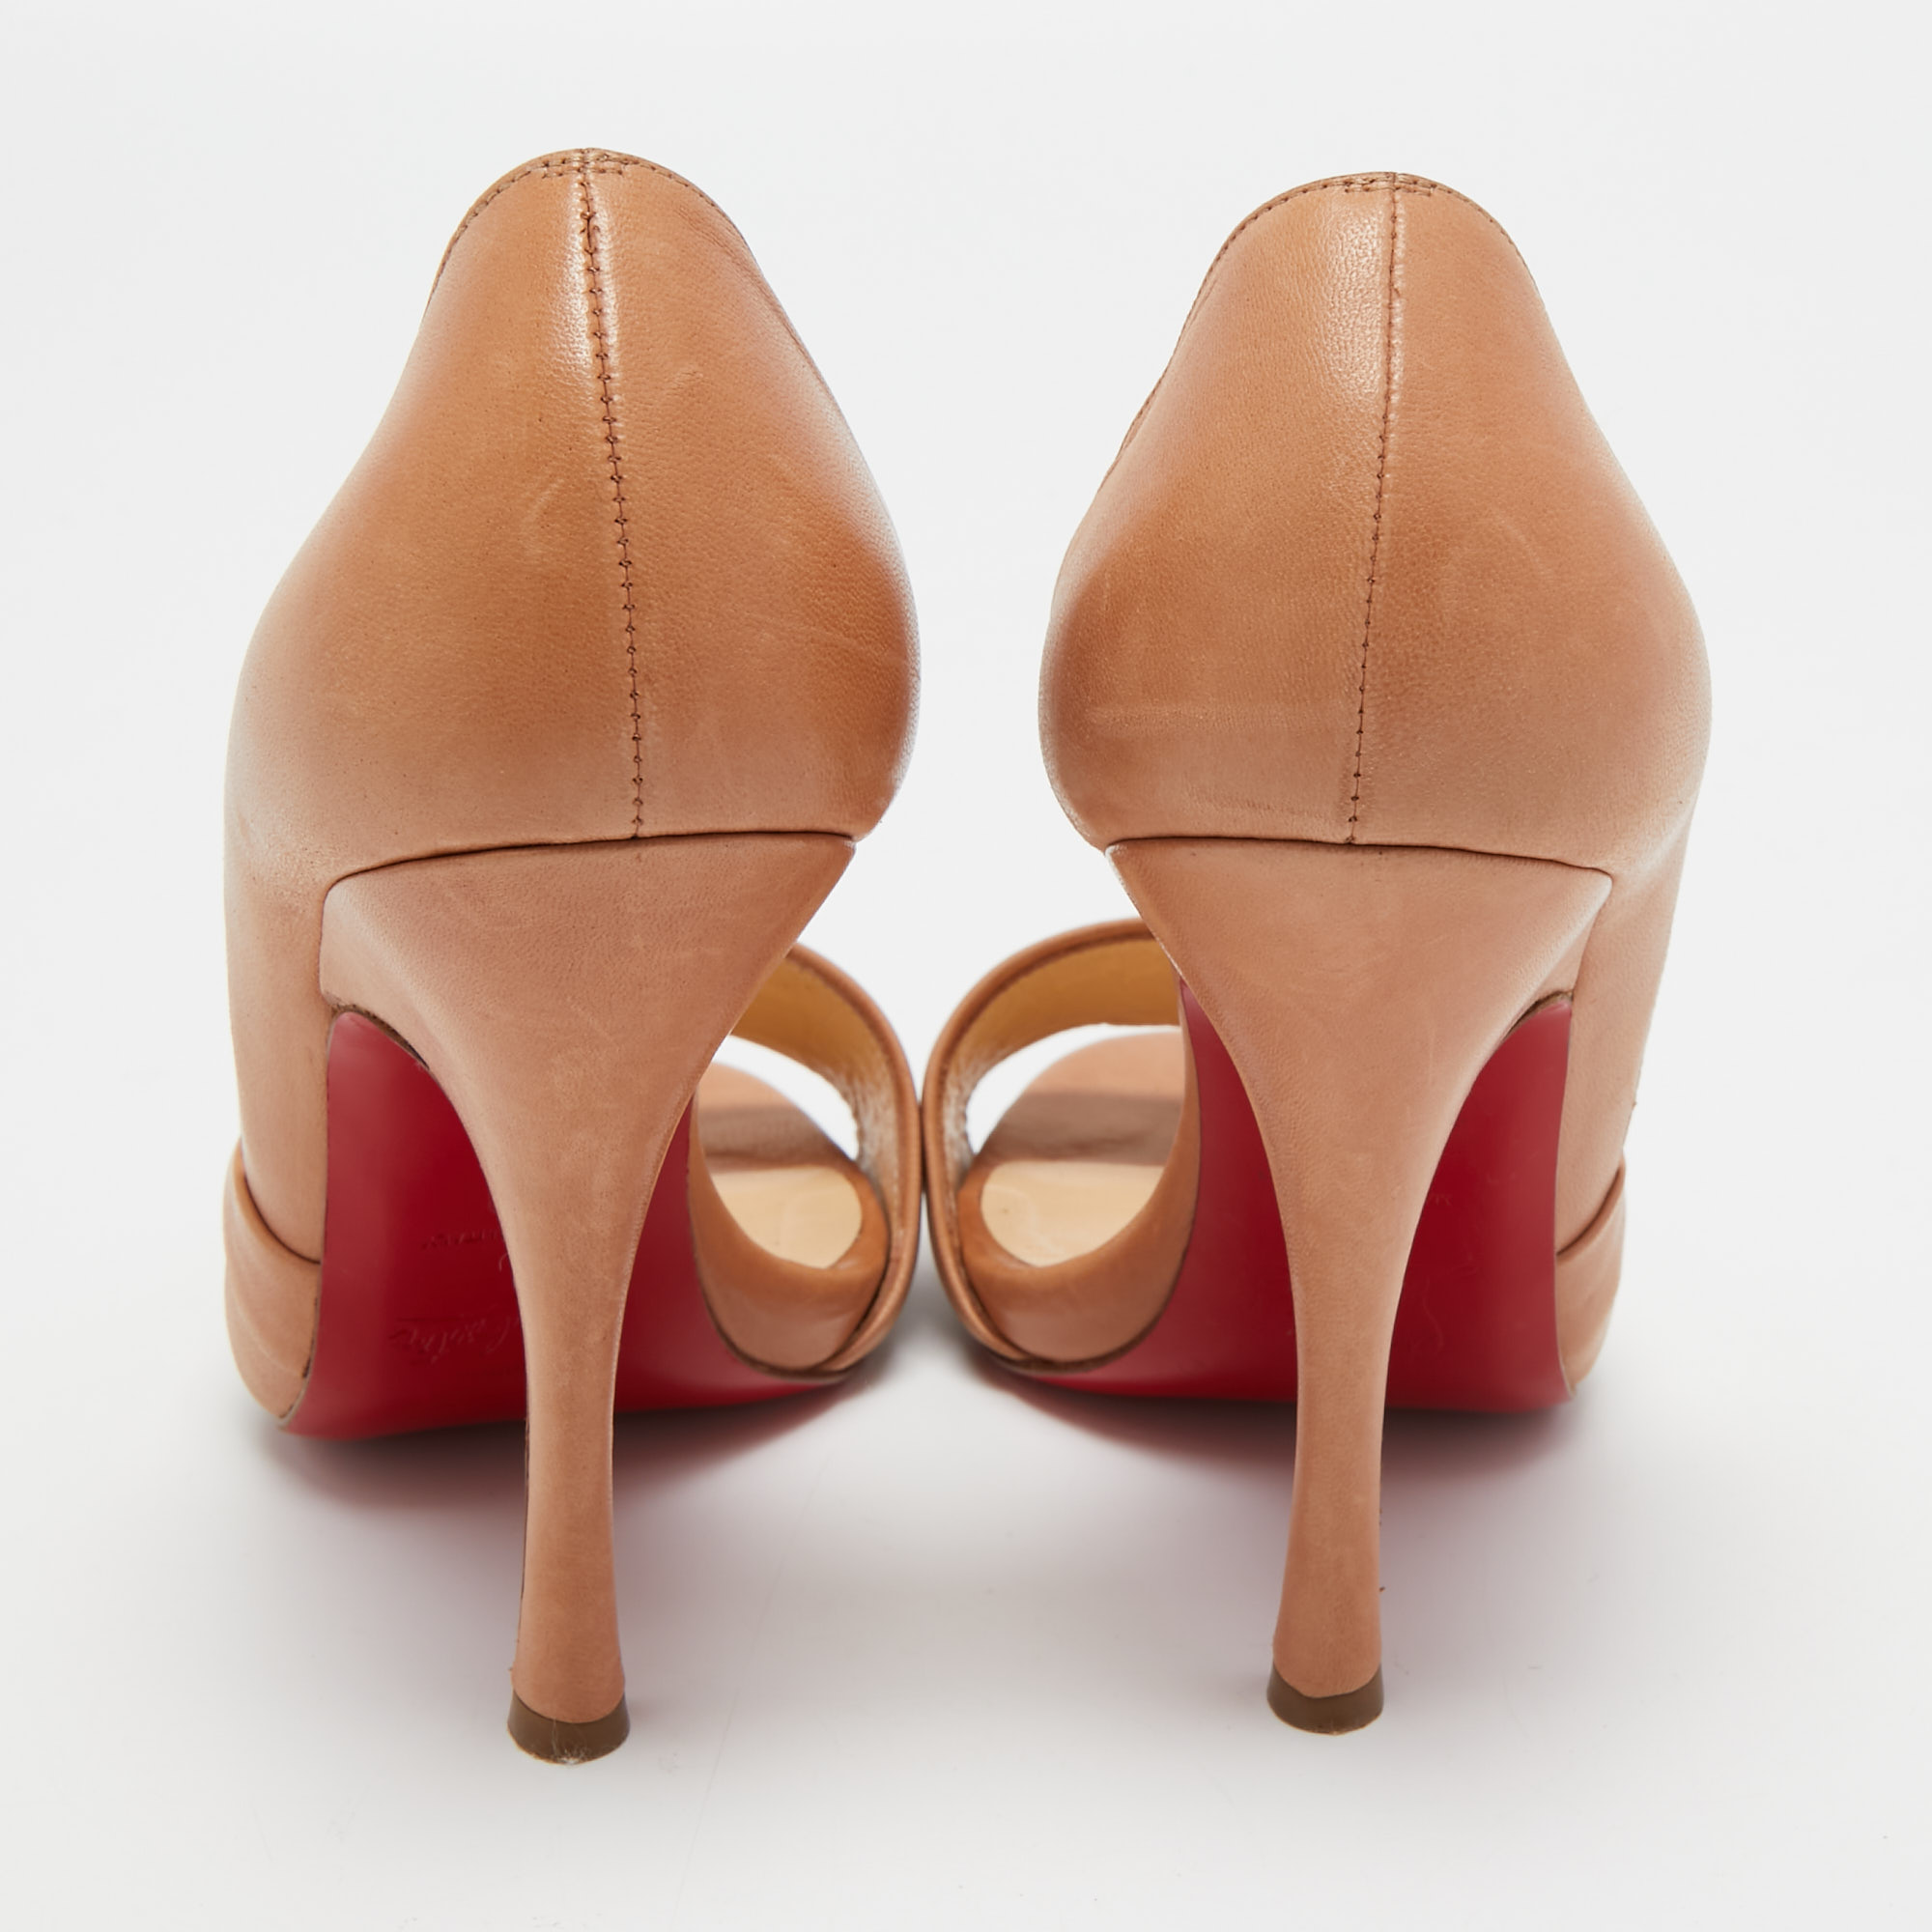 Christian Louboutin Beige Pleated Leather D'orsay Open Toe Sandals Size 39